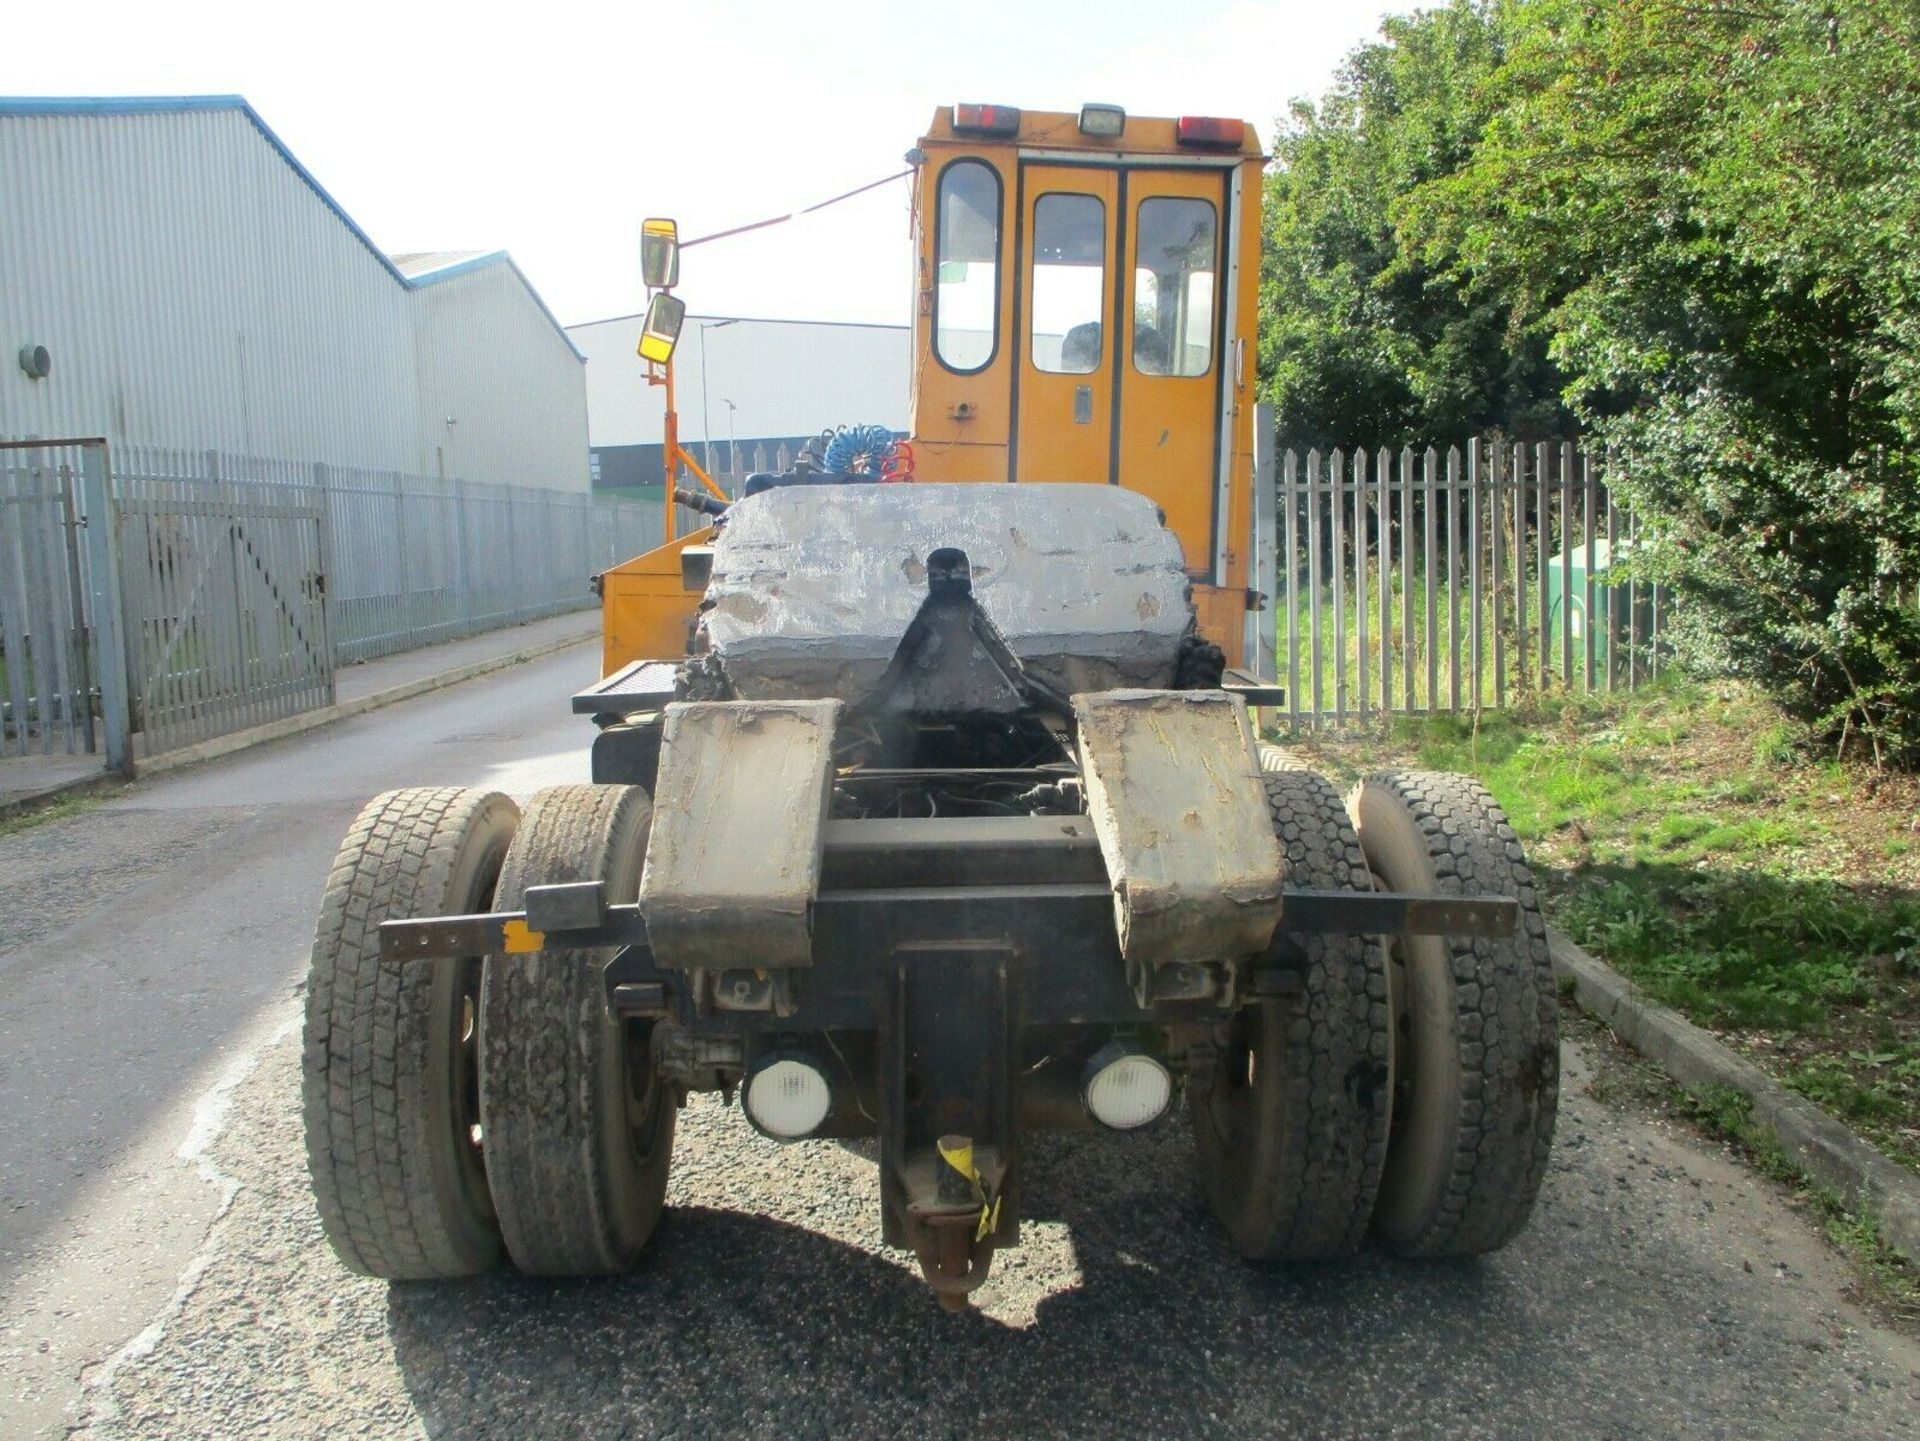 Reliance Dock spotter shunter tow tug tractor unit - Image 6 of 11